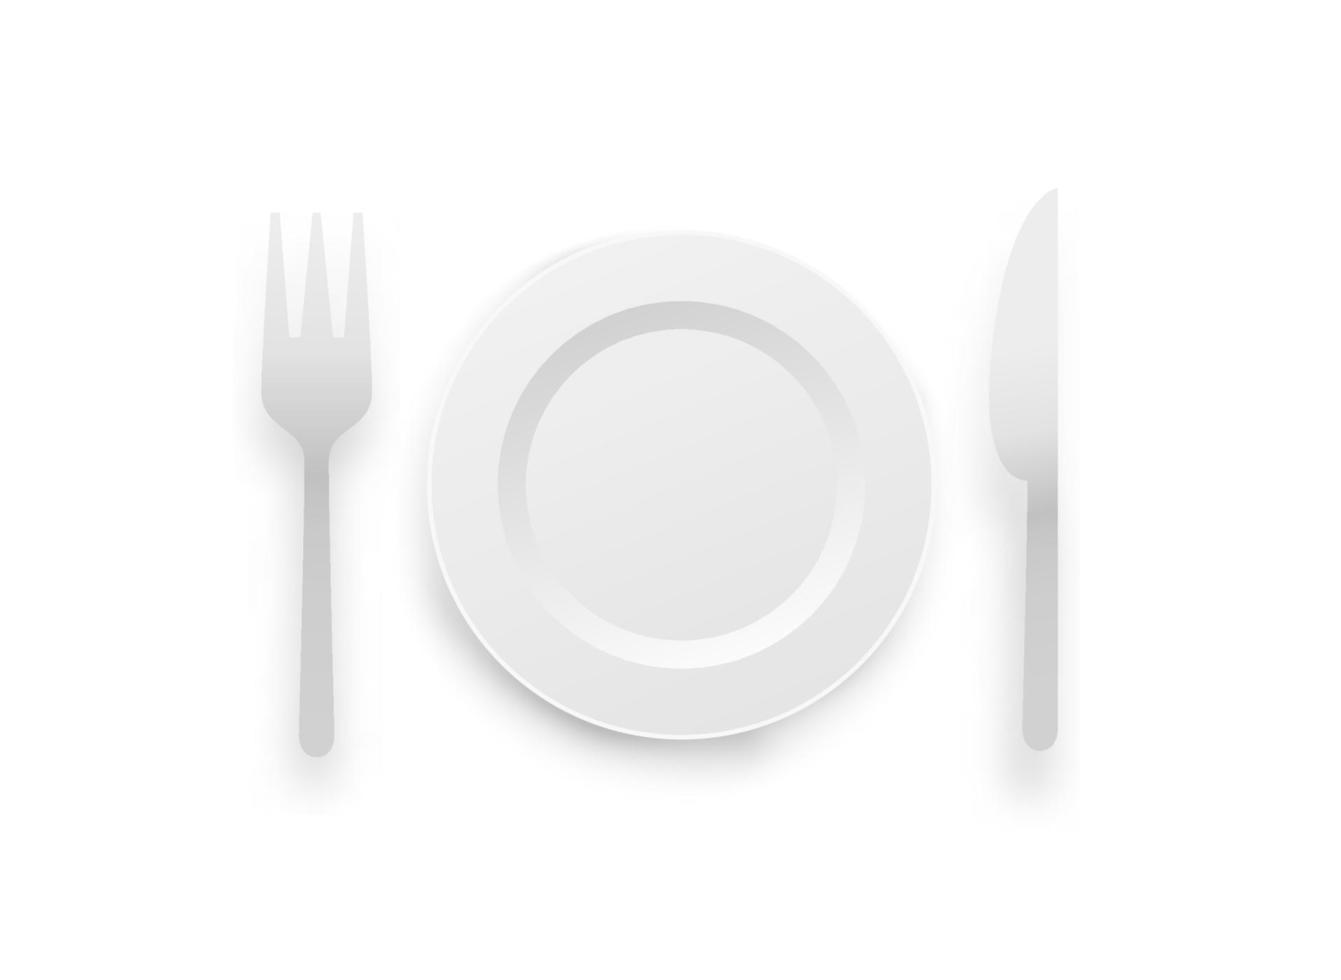 White plate, fork and knife isolated on white background. 3d vector illustration.